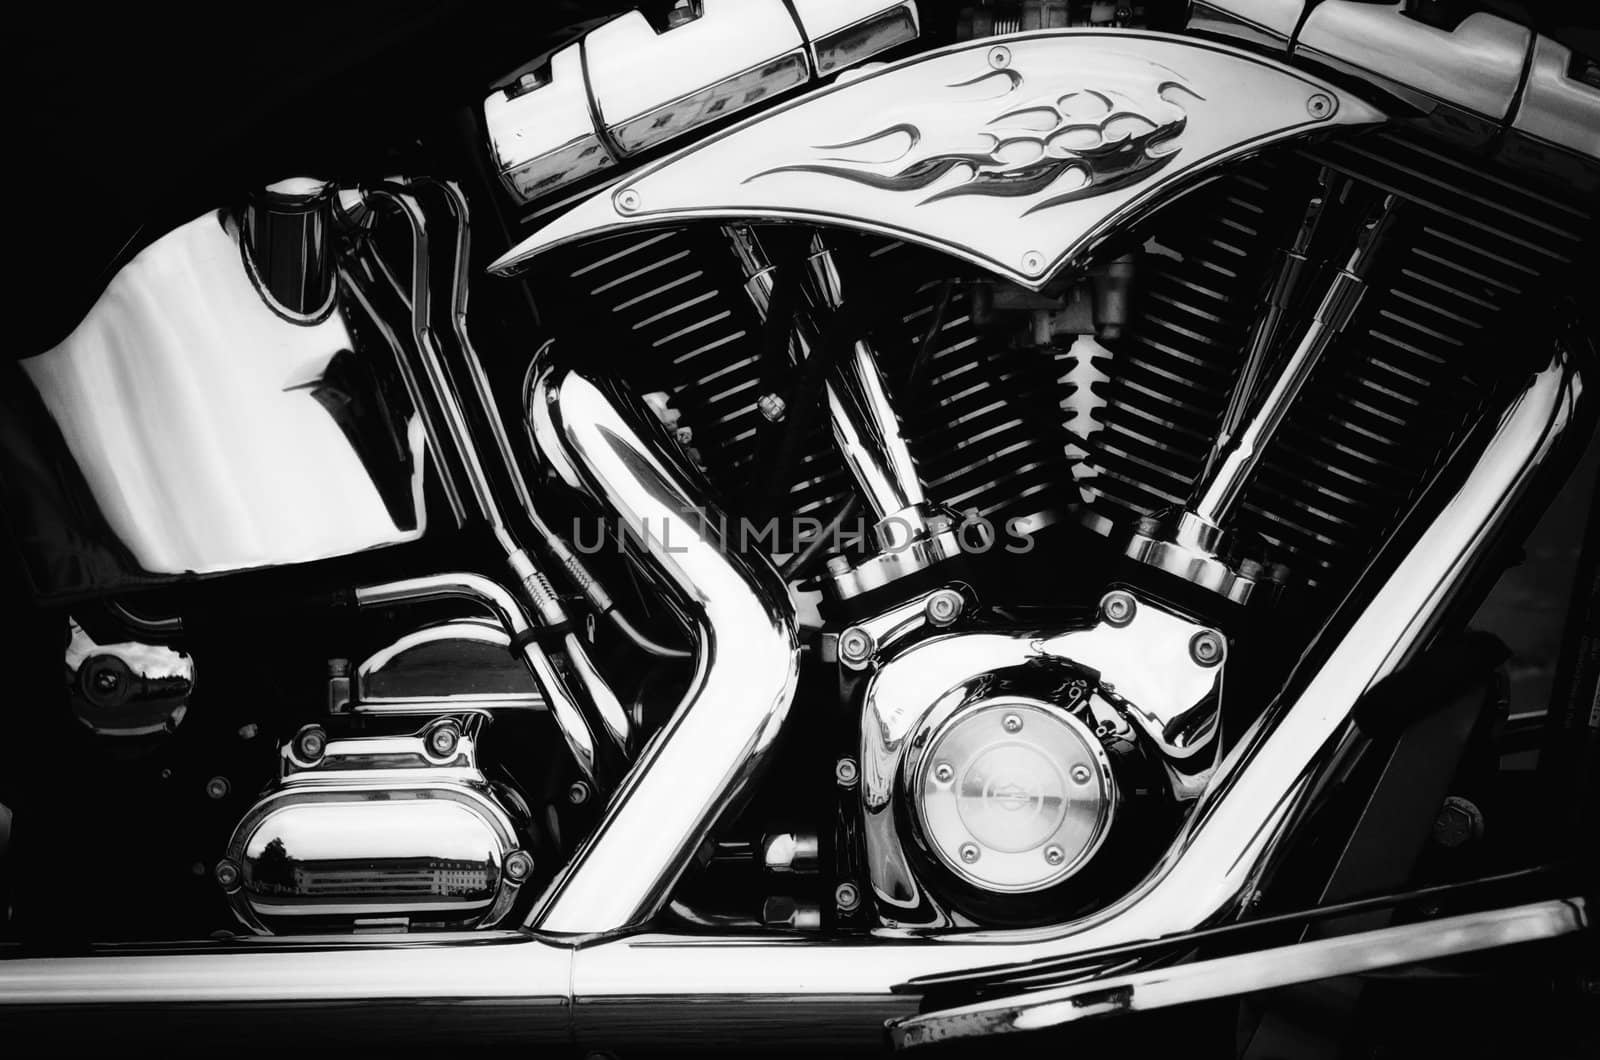 motorcycle engine in black and white by njaj